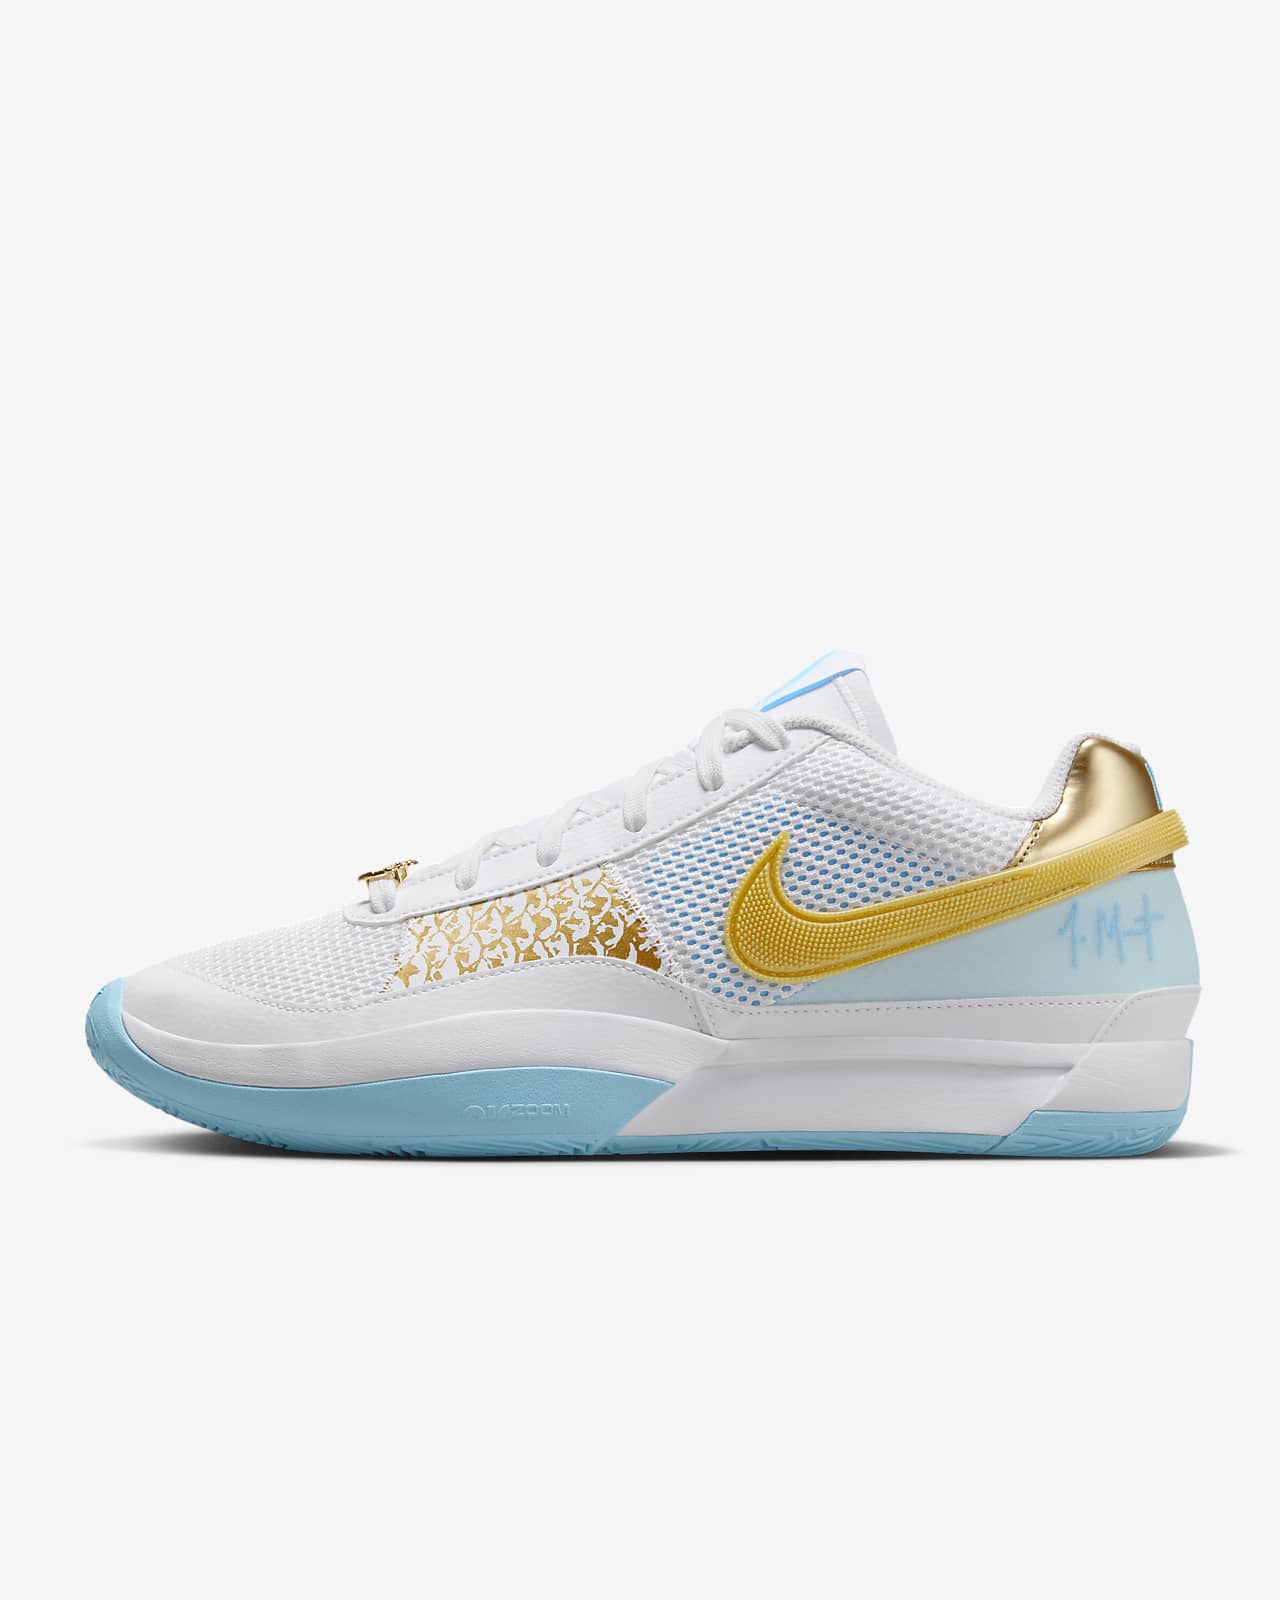 https://static.nike.com/a/images/t_PDP_1280_v1/f_auto,q_auto:eco/b0a9a1ea-f518-4824-ac5f-88153dbcf906/ja-1-lunar-new-year-basketball-shoes-bCx2W3.png